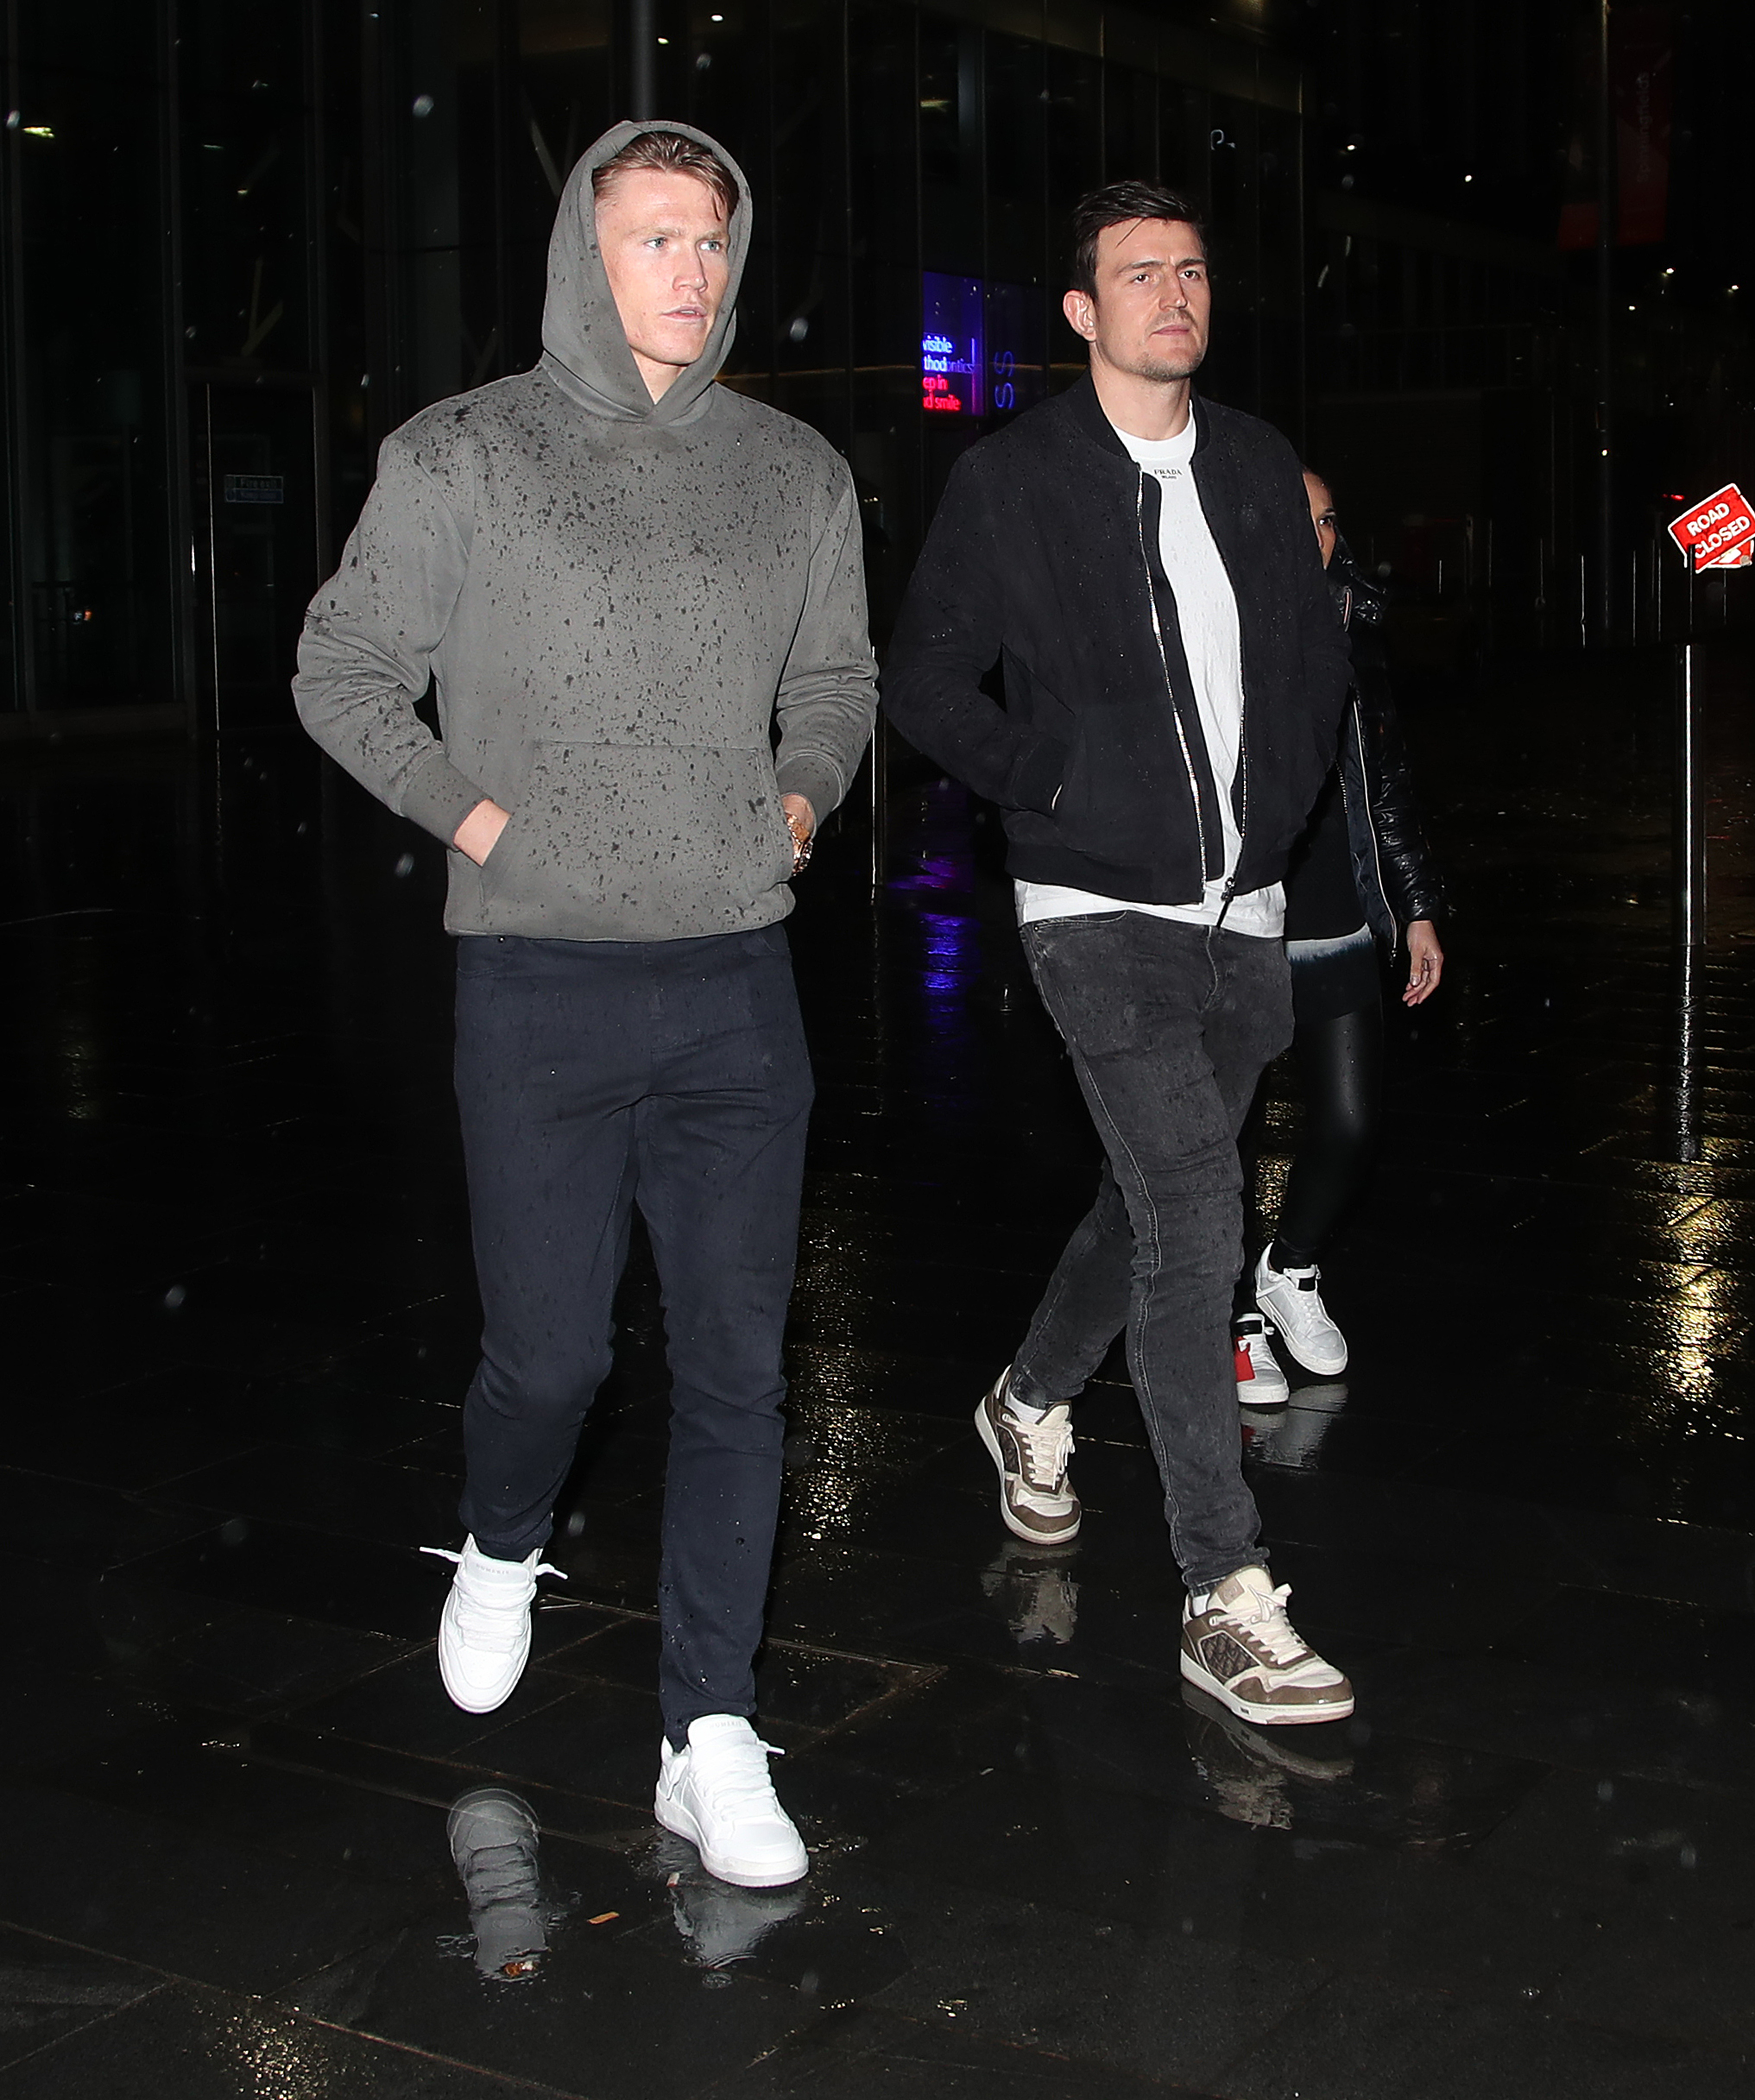 Scott McTominay was flanked by Harry Maguire